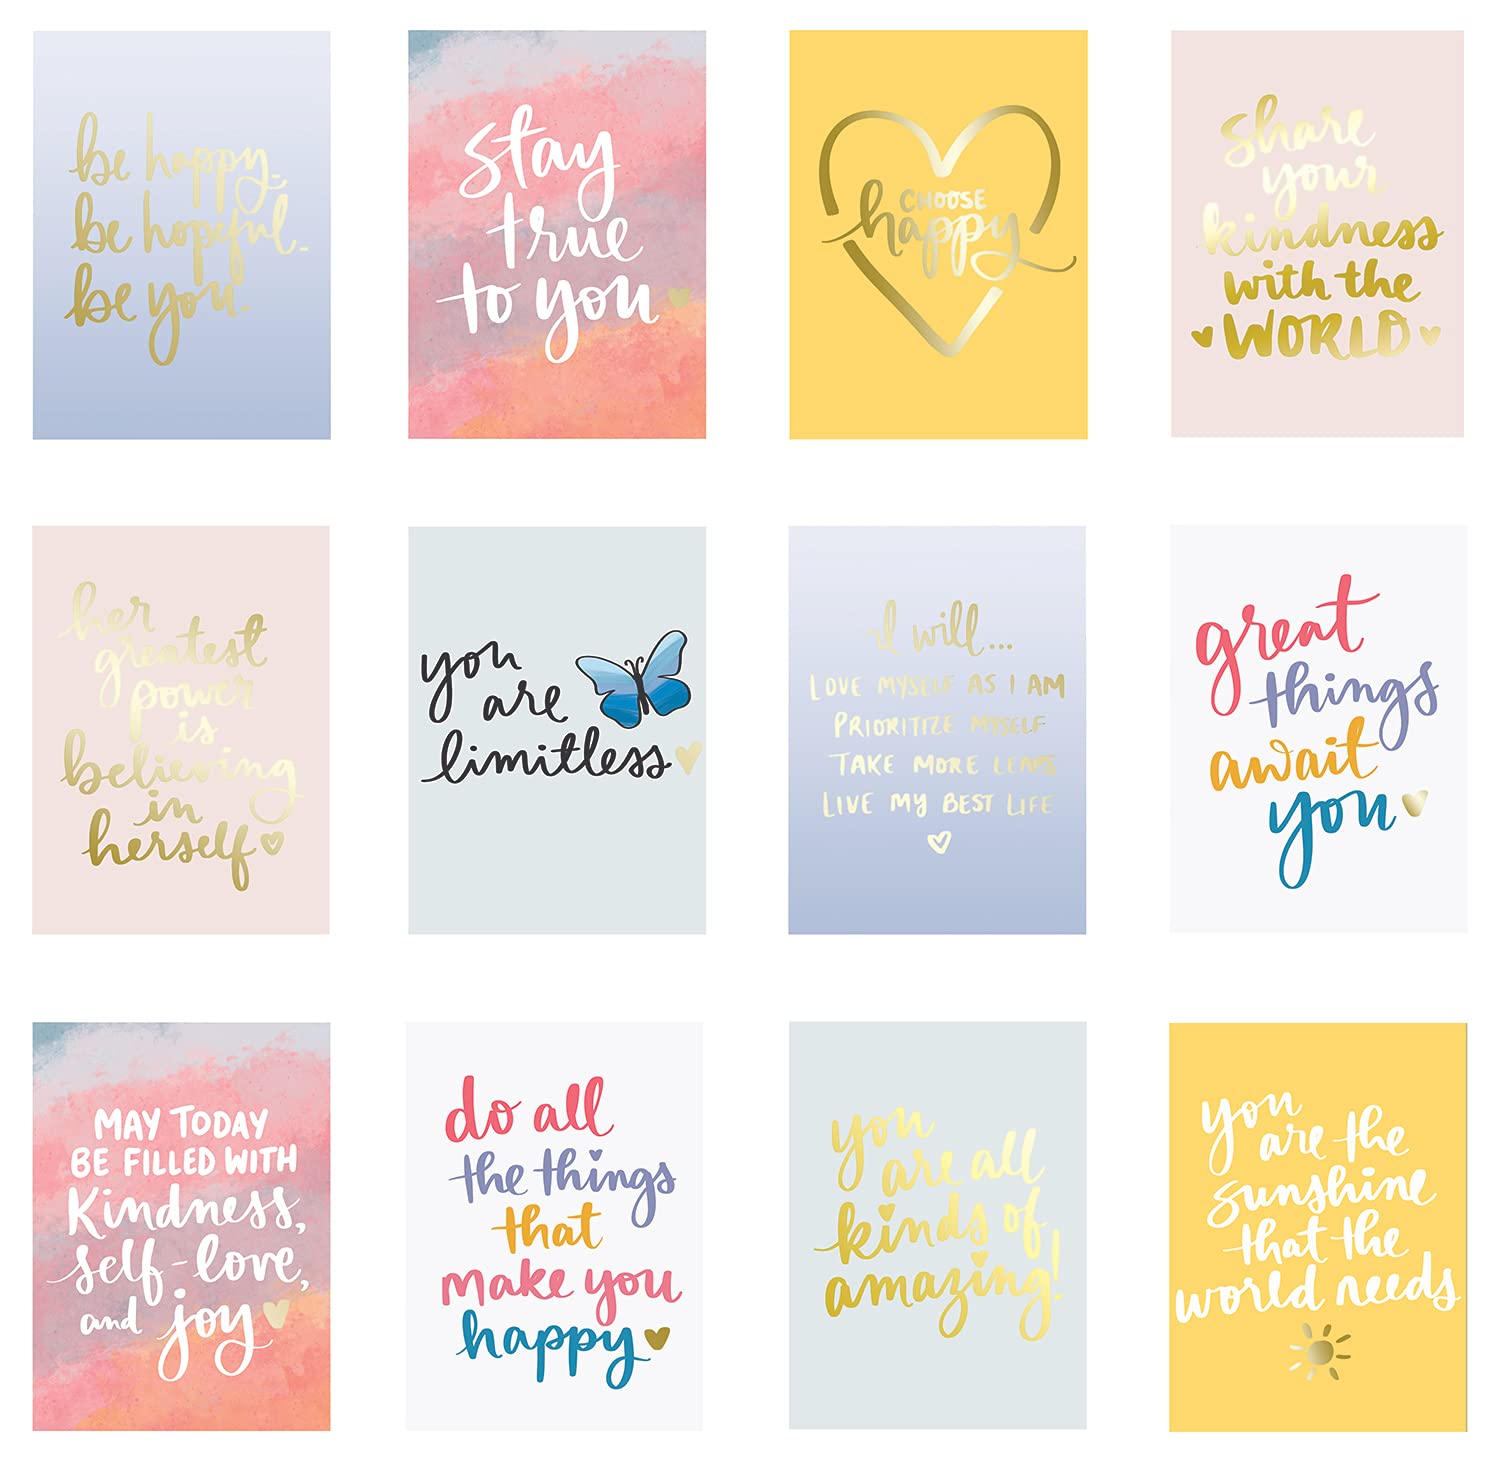 12 Gold Stamped Inspirational Display Cards by Dayna Lee